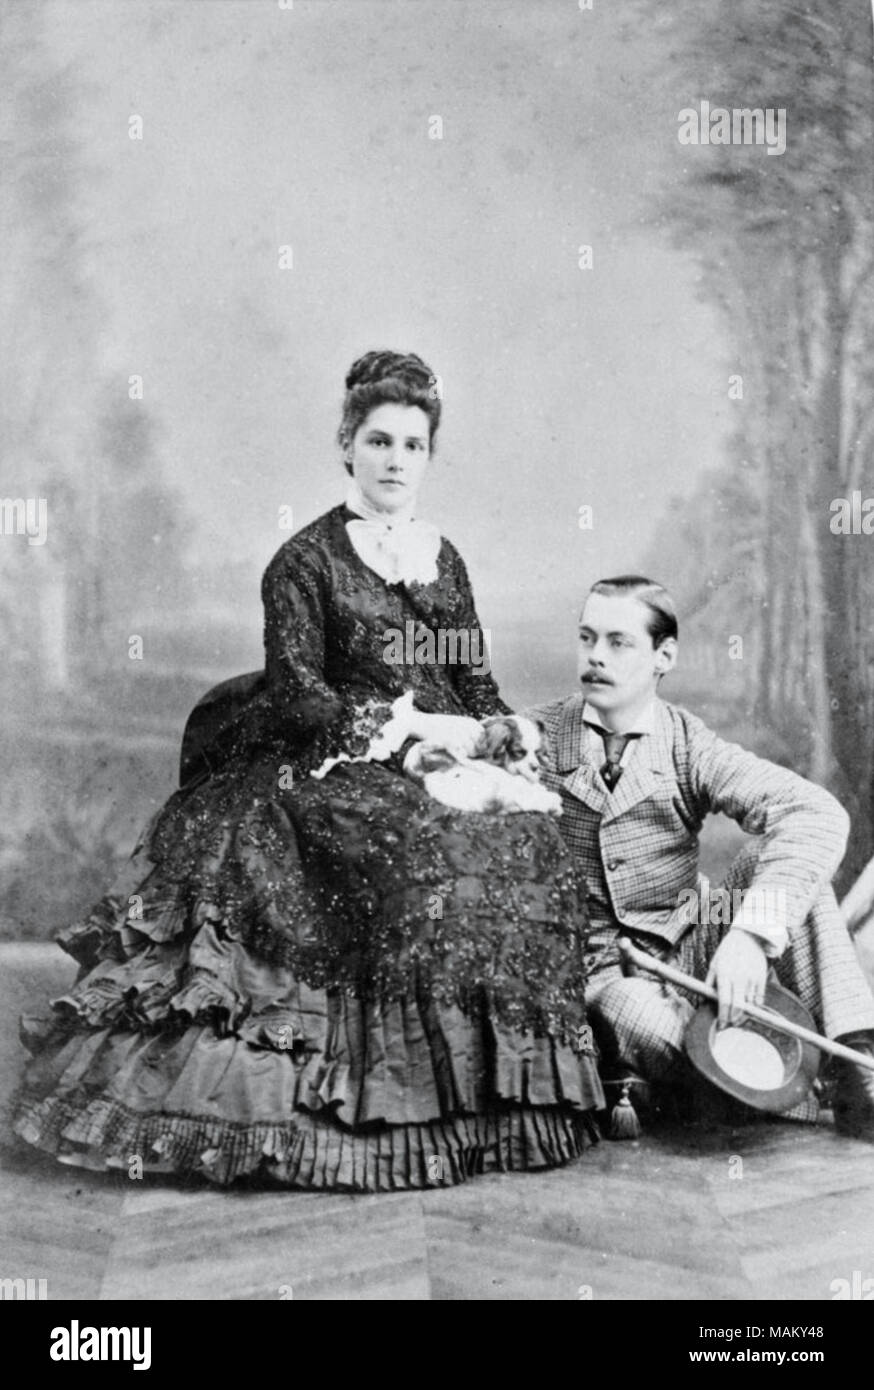 Lord Randolph Churchill (1849-1895) married on April 15, 1874 at the British Embassy in Paris with Miss Jennie Jerome (1854-1921). Photographer Georges Penabert also made two photographs for the same period, of Lady H+?l+?ne Standish, present at the wedding ceremony with her husband Henry Noailles Widdringtion Standish, Lord of the Manor of Standish. The Standish couple frequent Lord Randolph Churchill and they are quoted in Jennie Jerome's correspondence. See the website-?: Churchill Archive.com. Fran+?ais-?: Lord Randolph Churchill (1849-1895) se marie le 15 avril 1874 +? l'ambassade britann Stock Photo